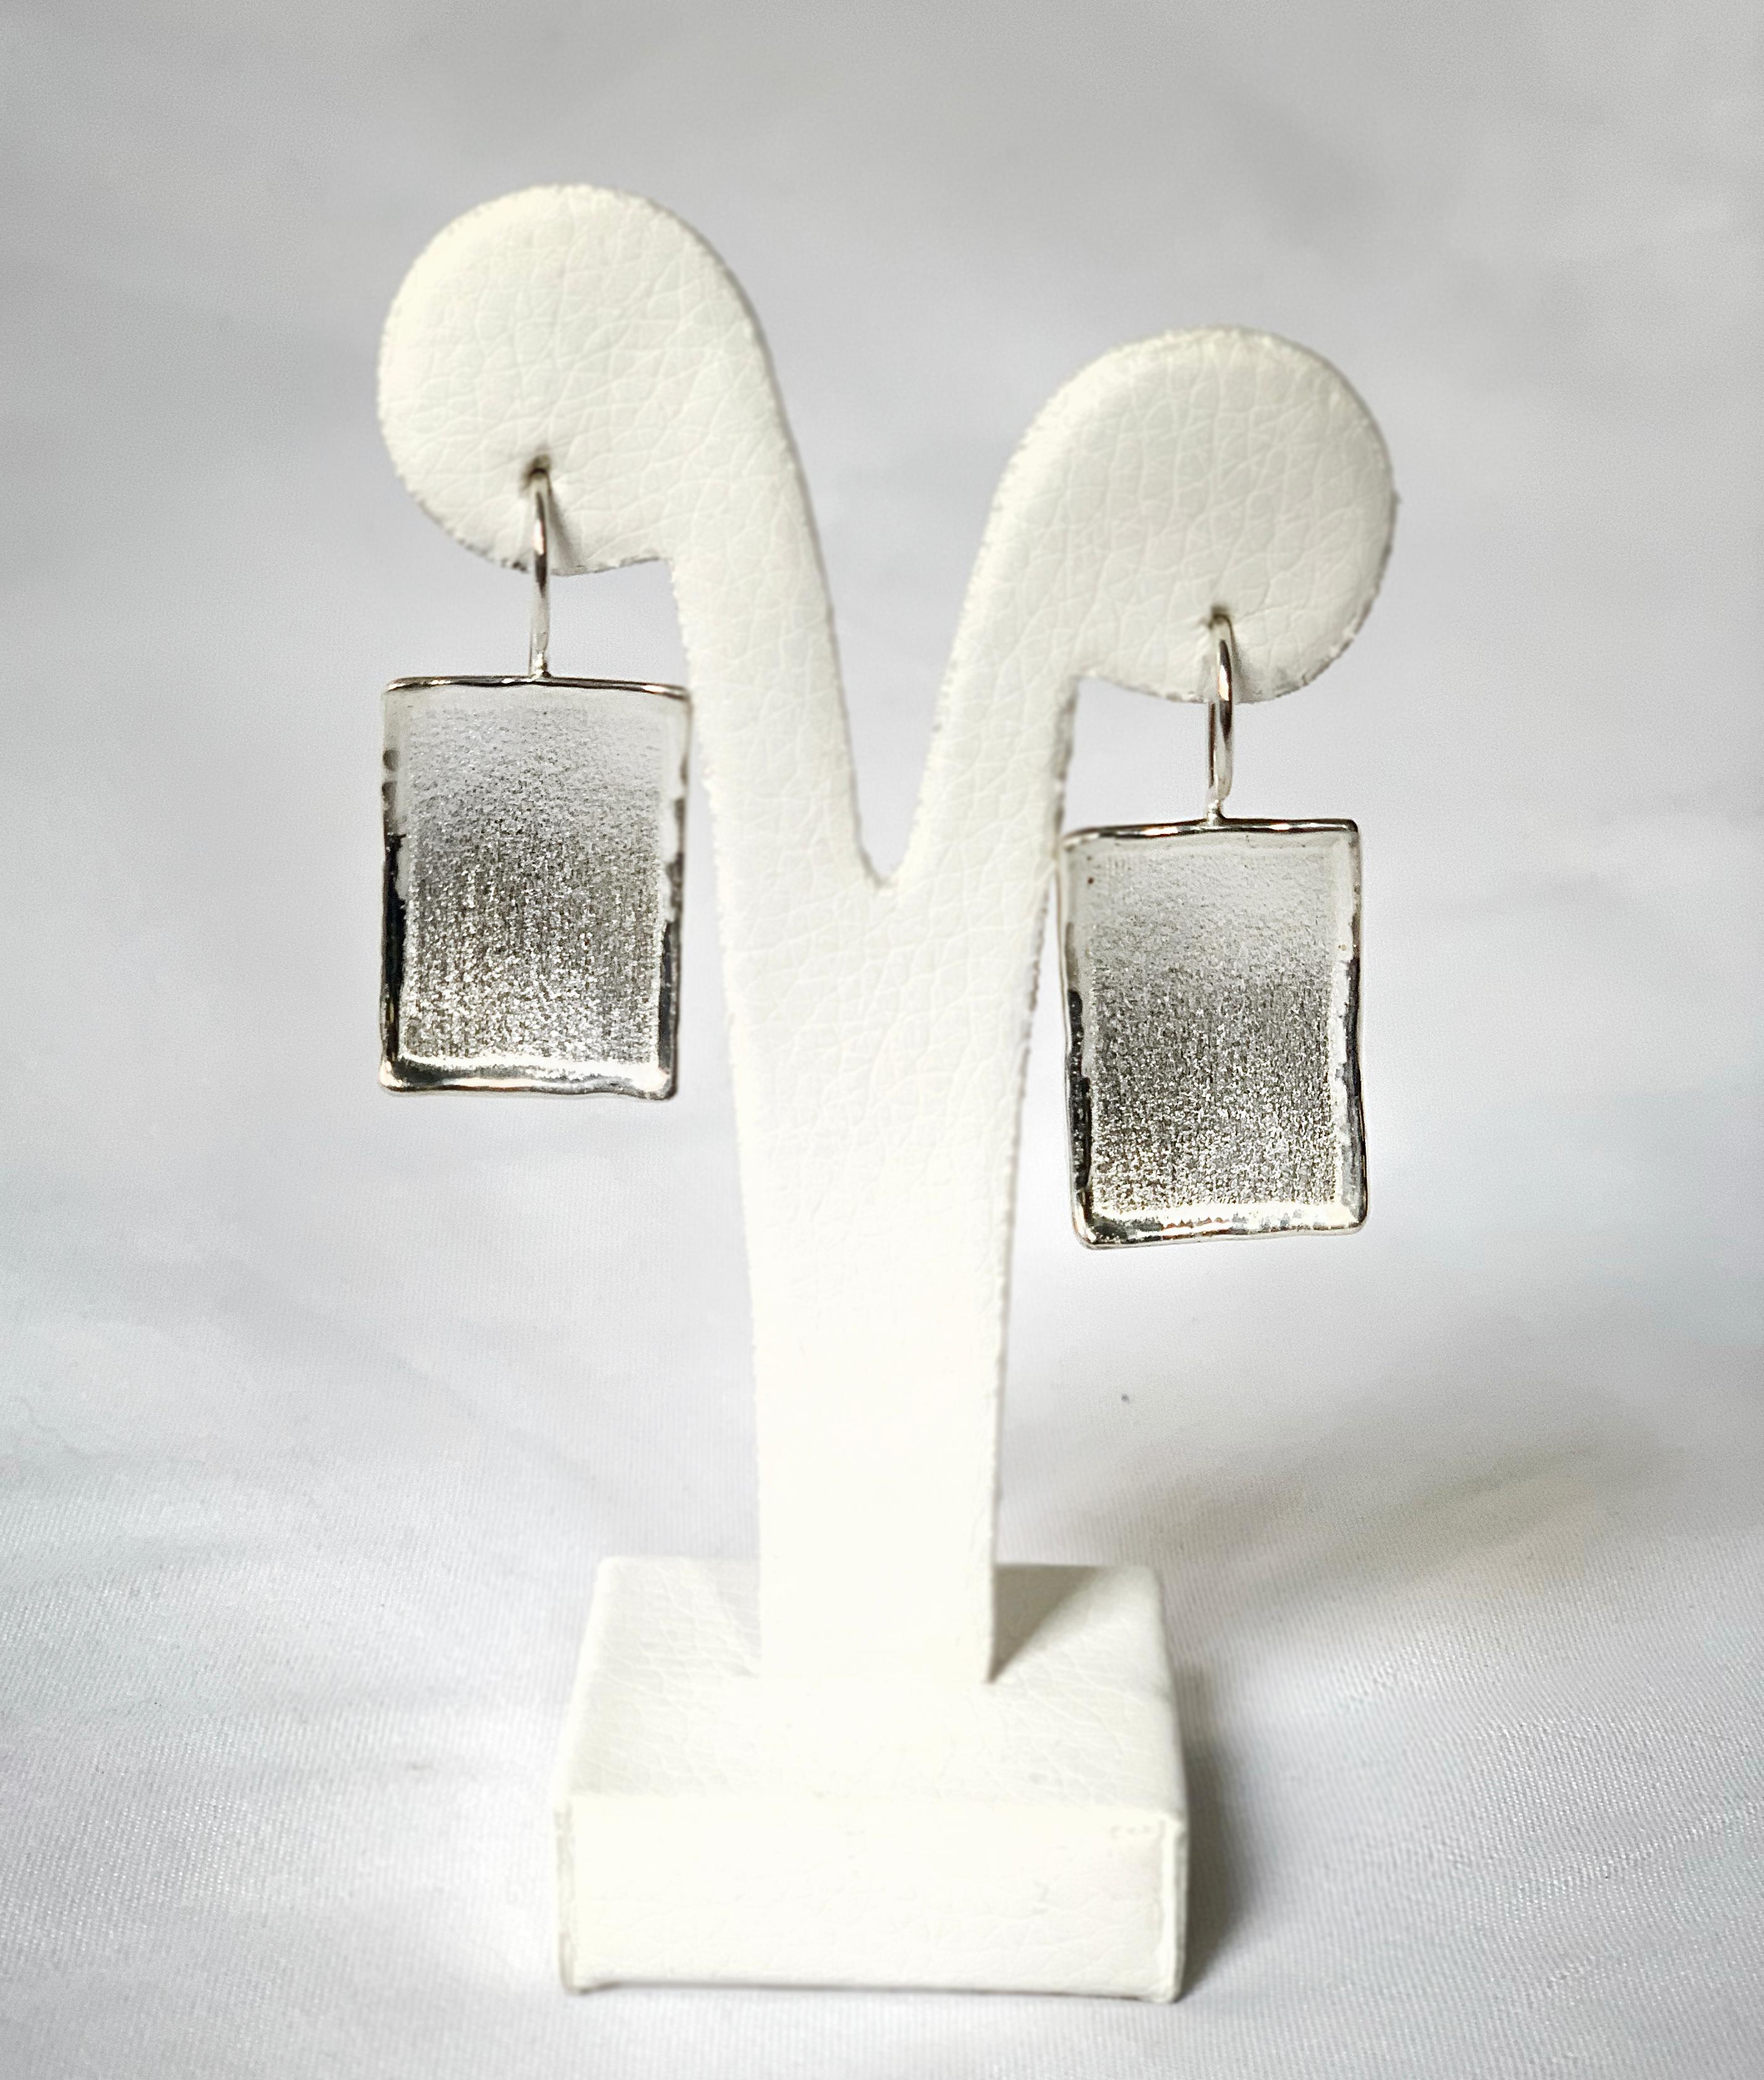 From the Yianni Creations Ammos Collection, this is a handmade artisan pair of earrings from fine silver 950 purity plated with palladium to resist against elements. These rectangular earrings catch an eye by the contrast of brushed texture and